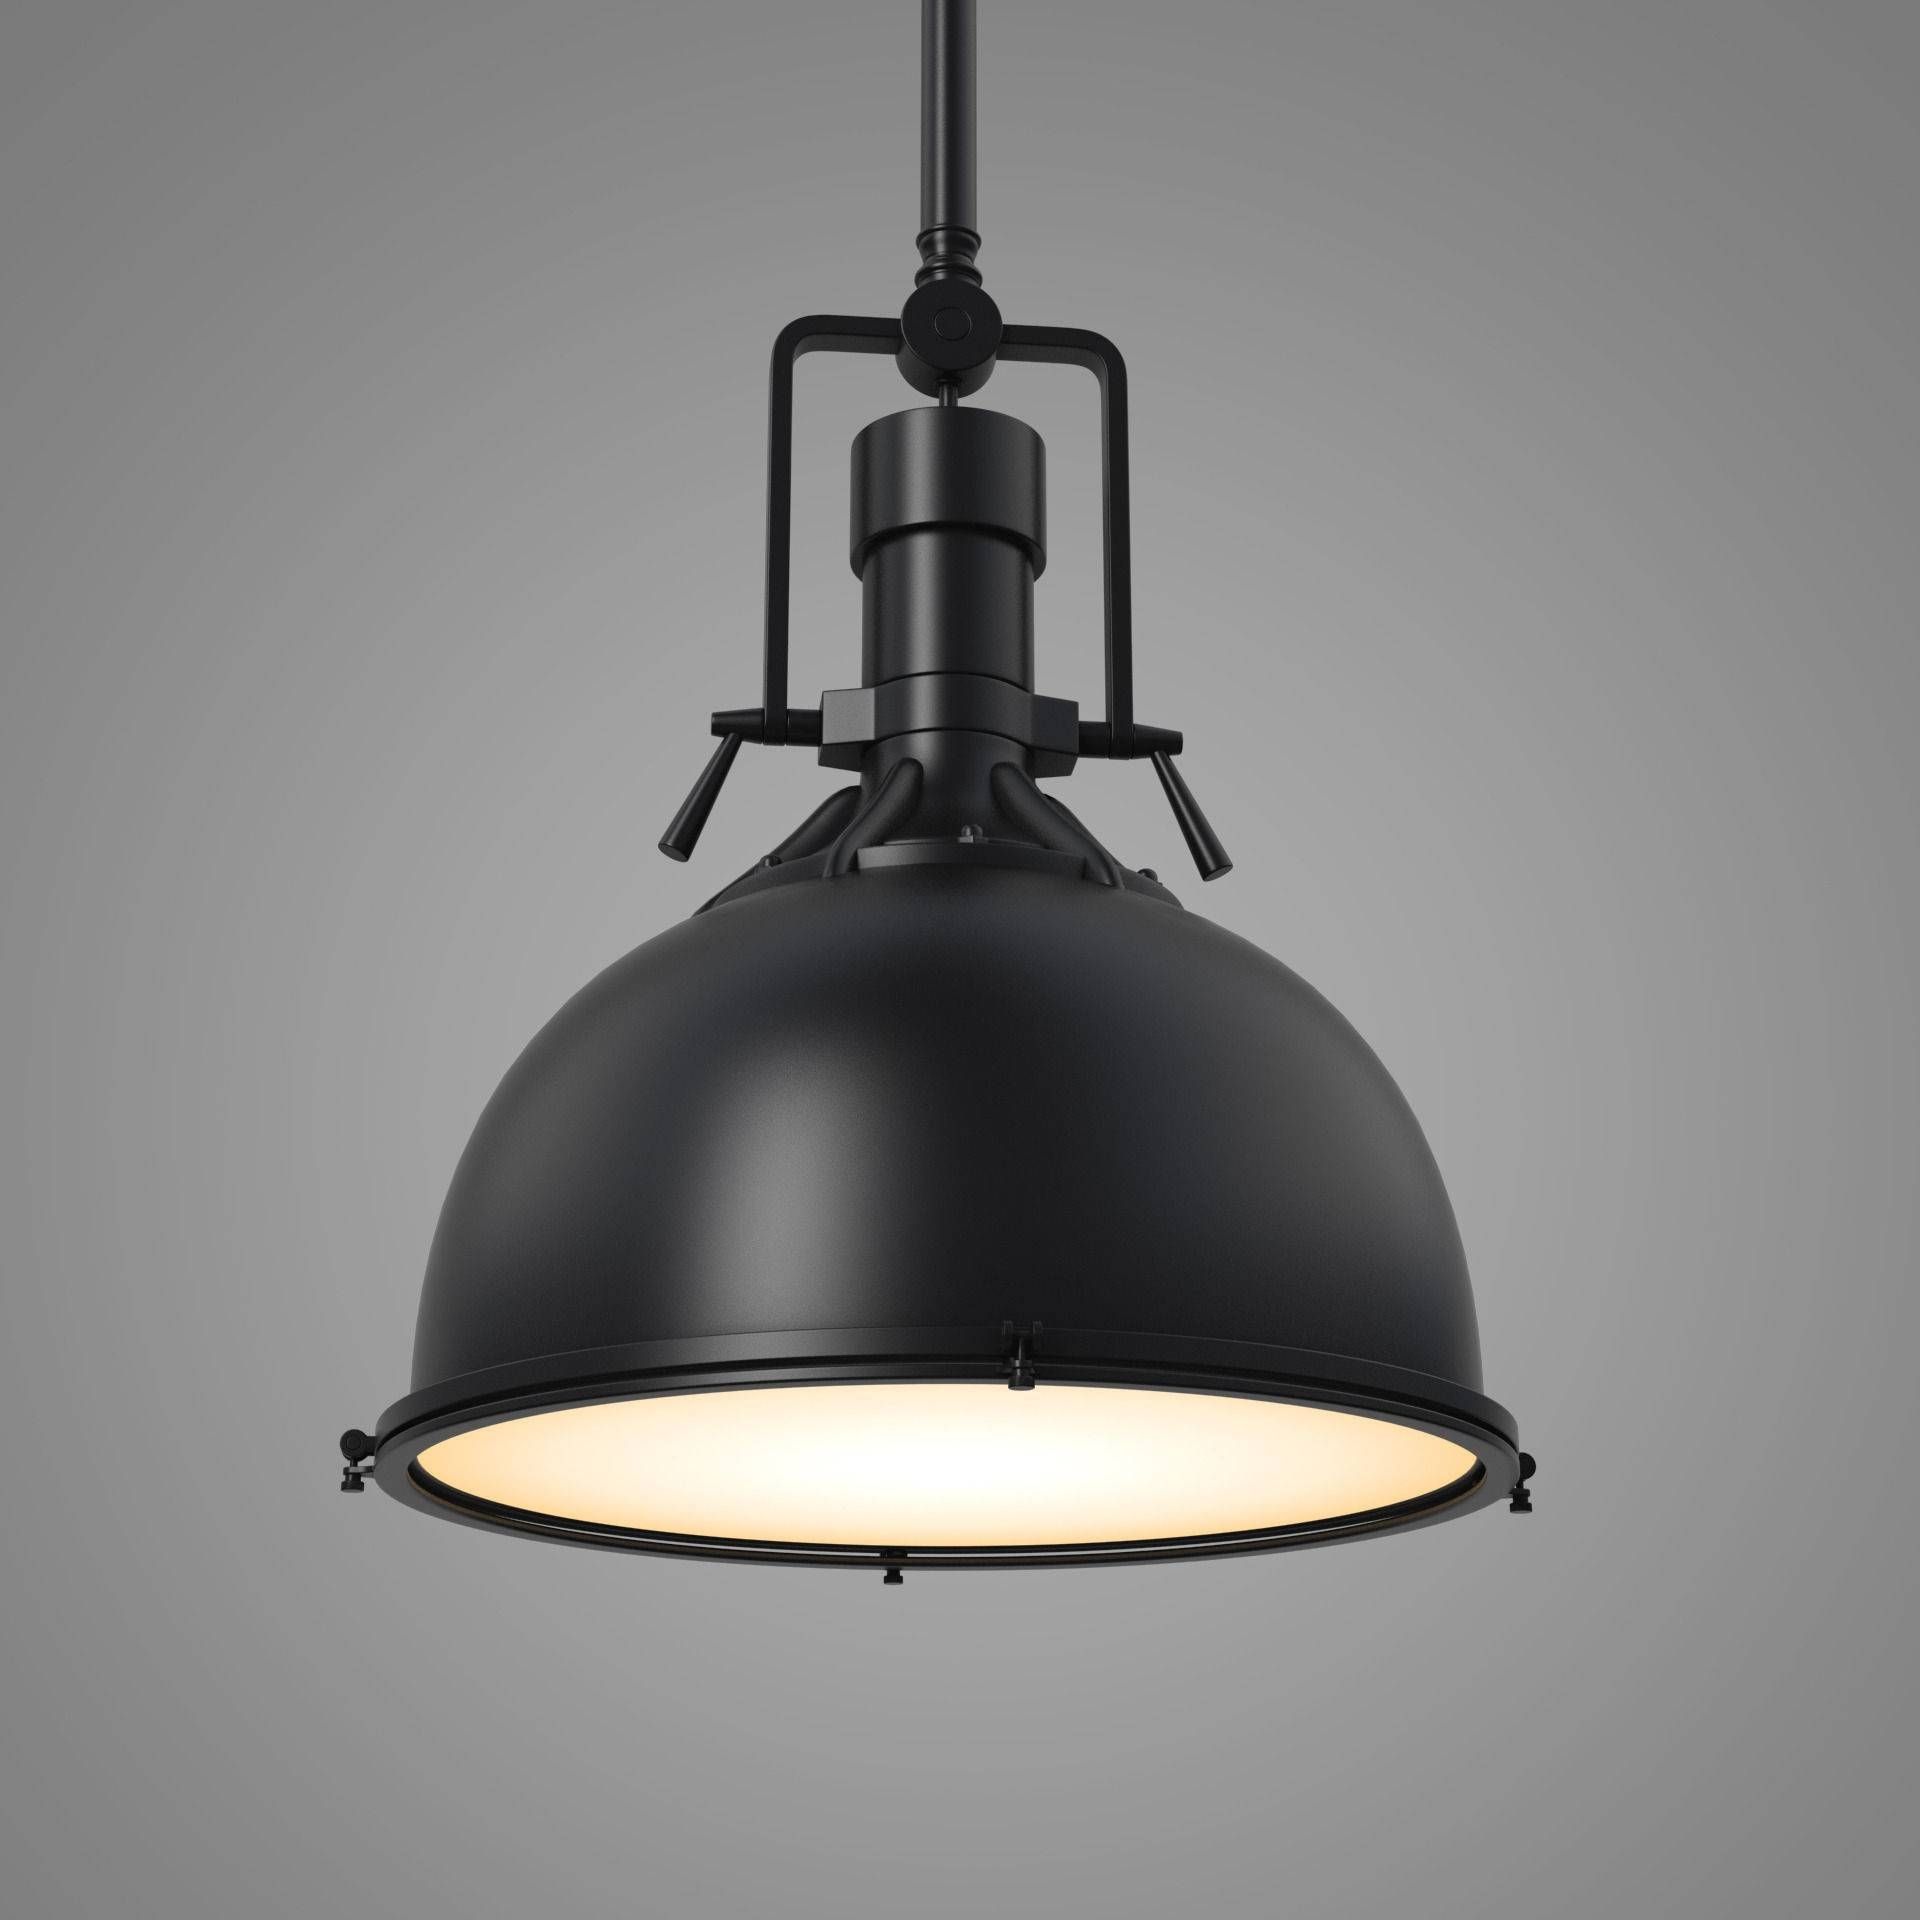 Harmon Pendant 3d Model | Cgtrader Throughout Harmon Pendant Lights (View 15 of 15)